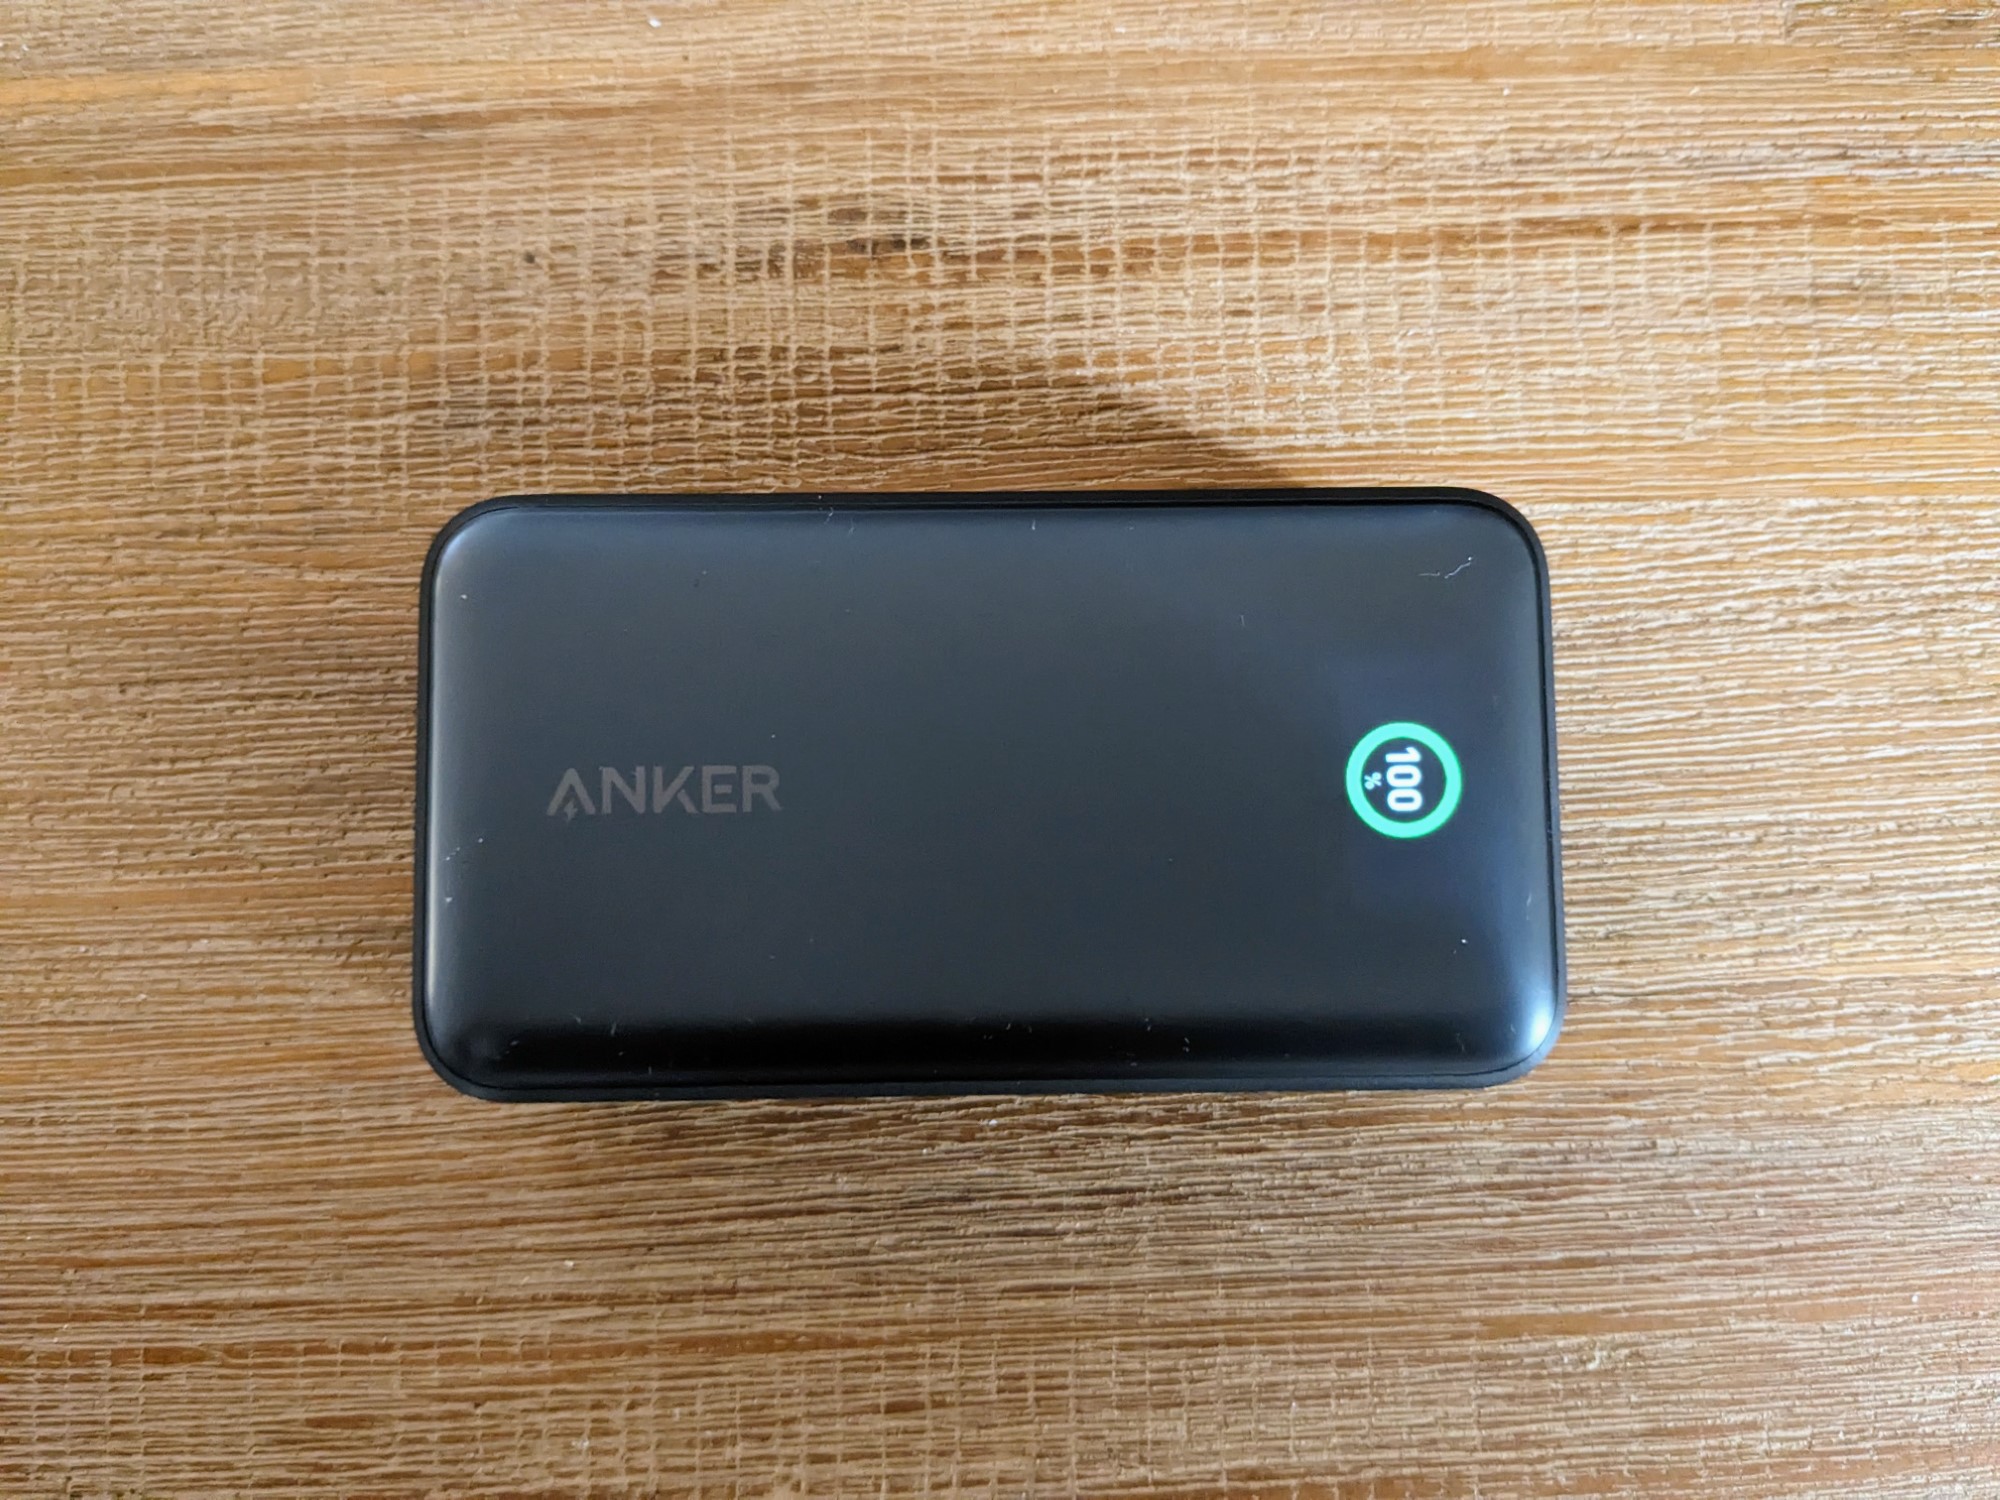 Power bank on wooden table with Anker branding and showing 100% charge